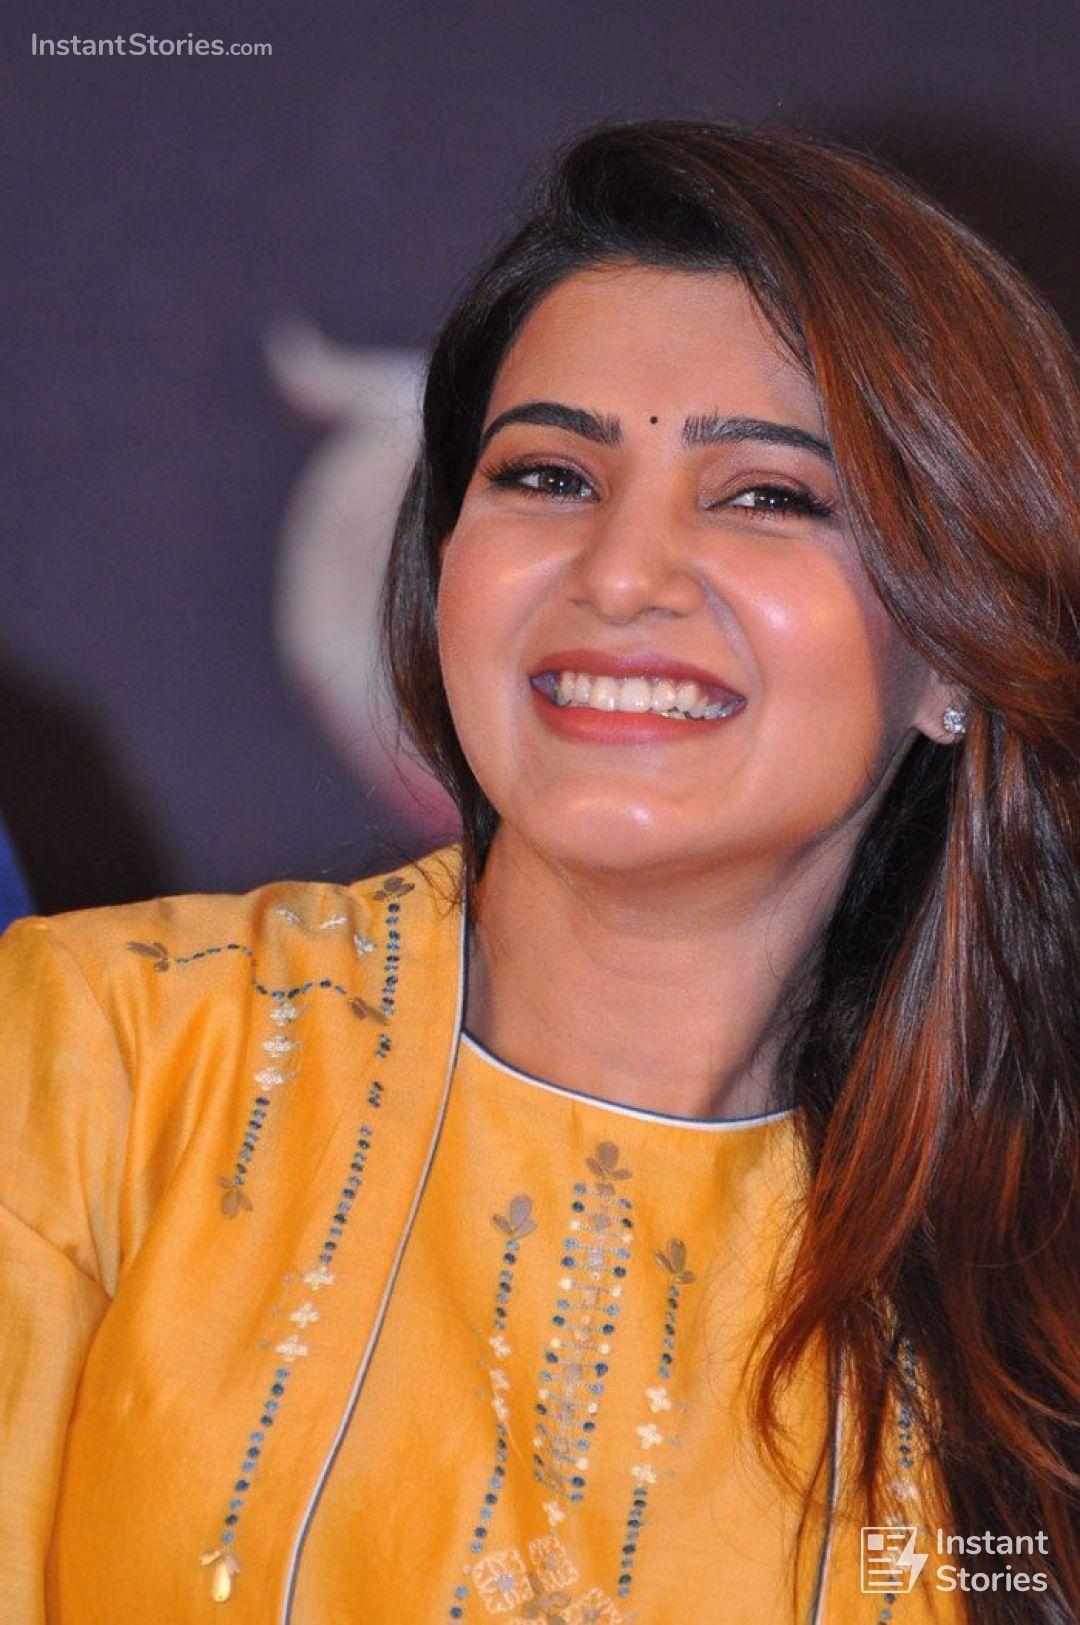 Download Samantha Akkineni wallpapers for mobile phone, free